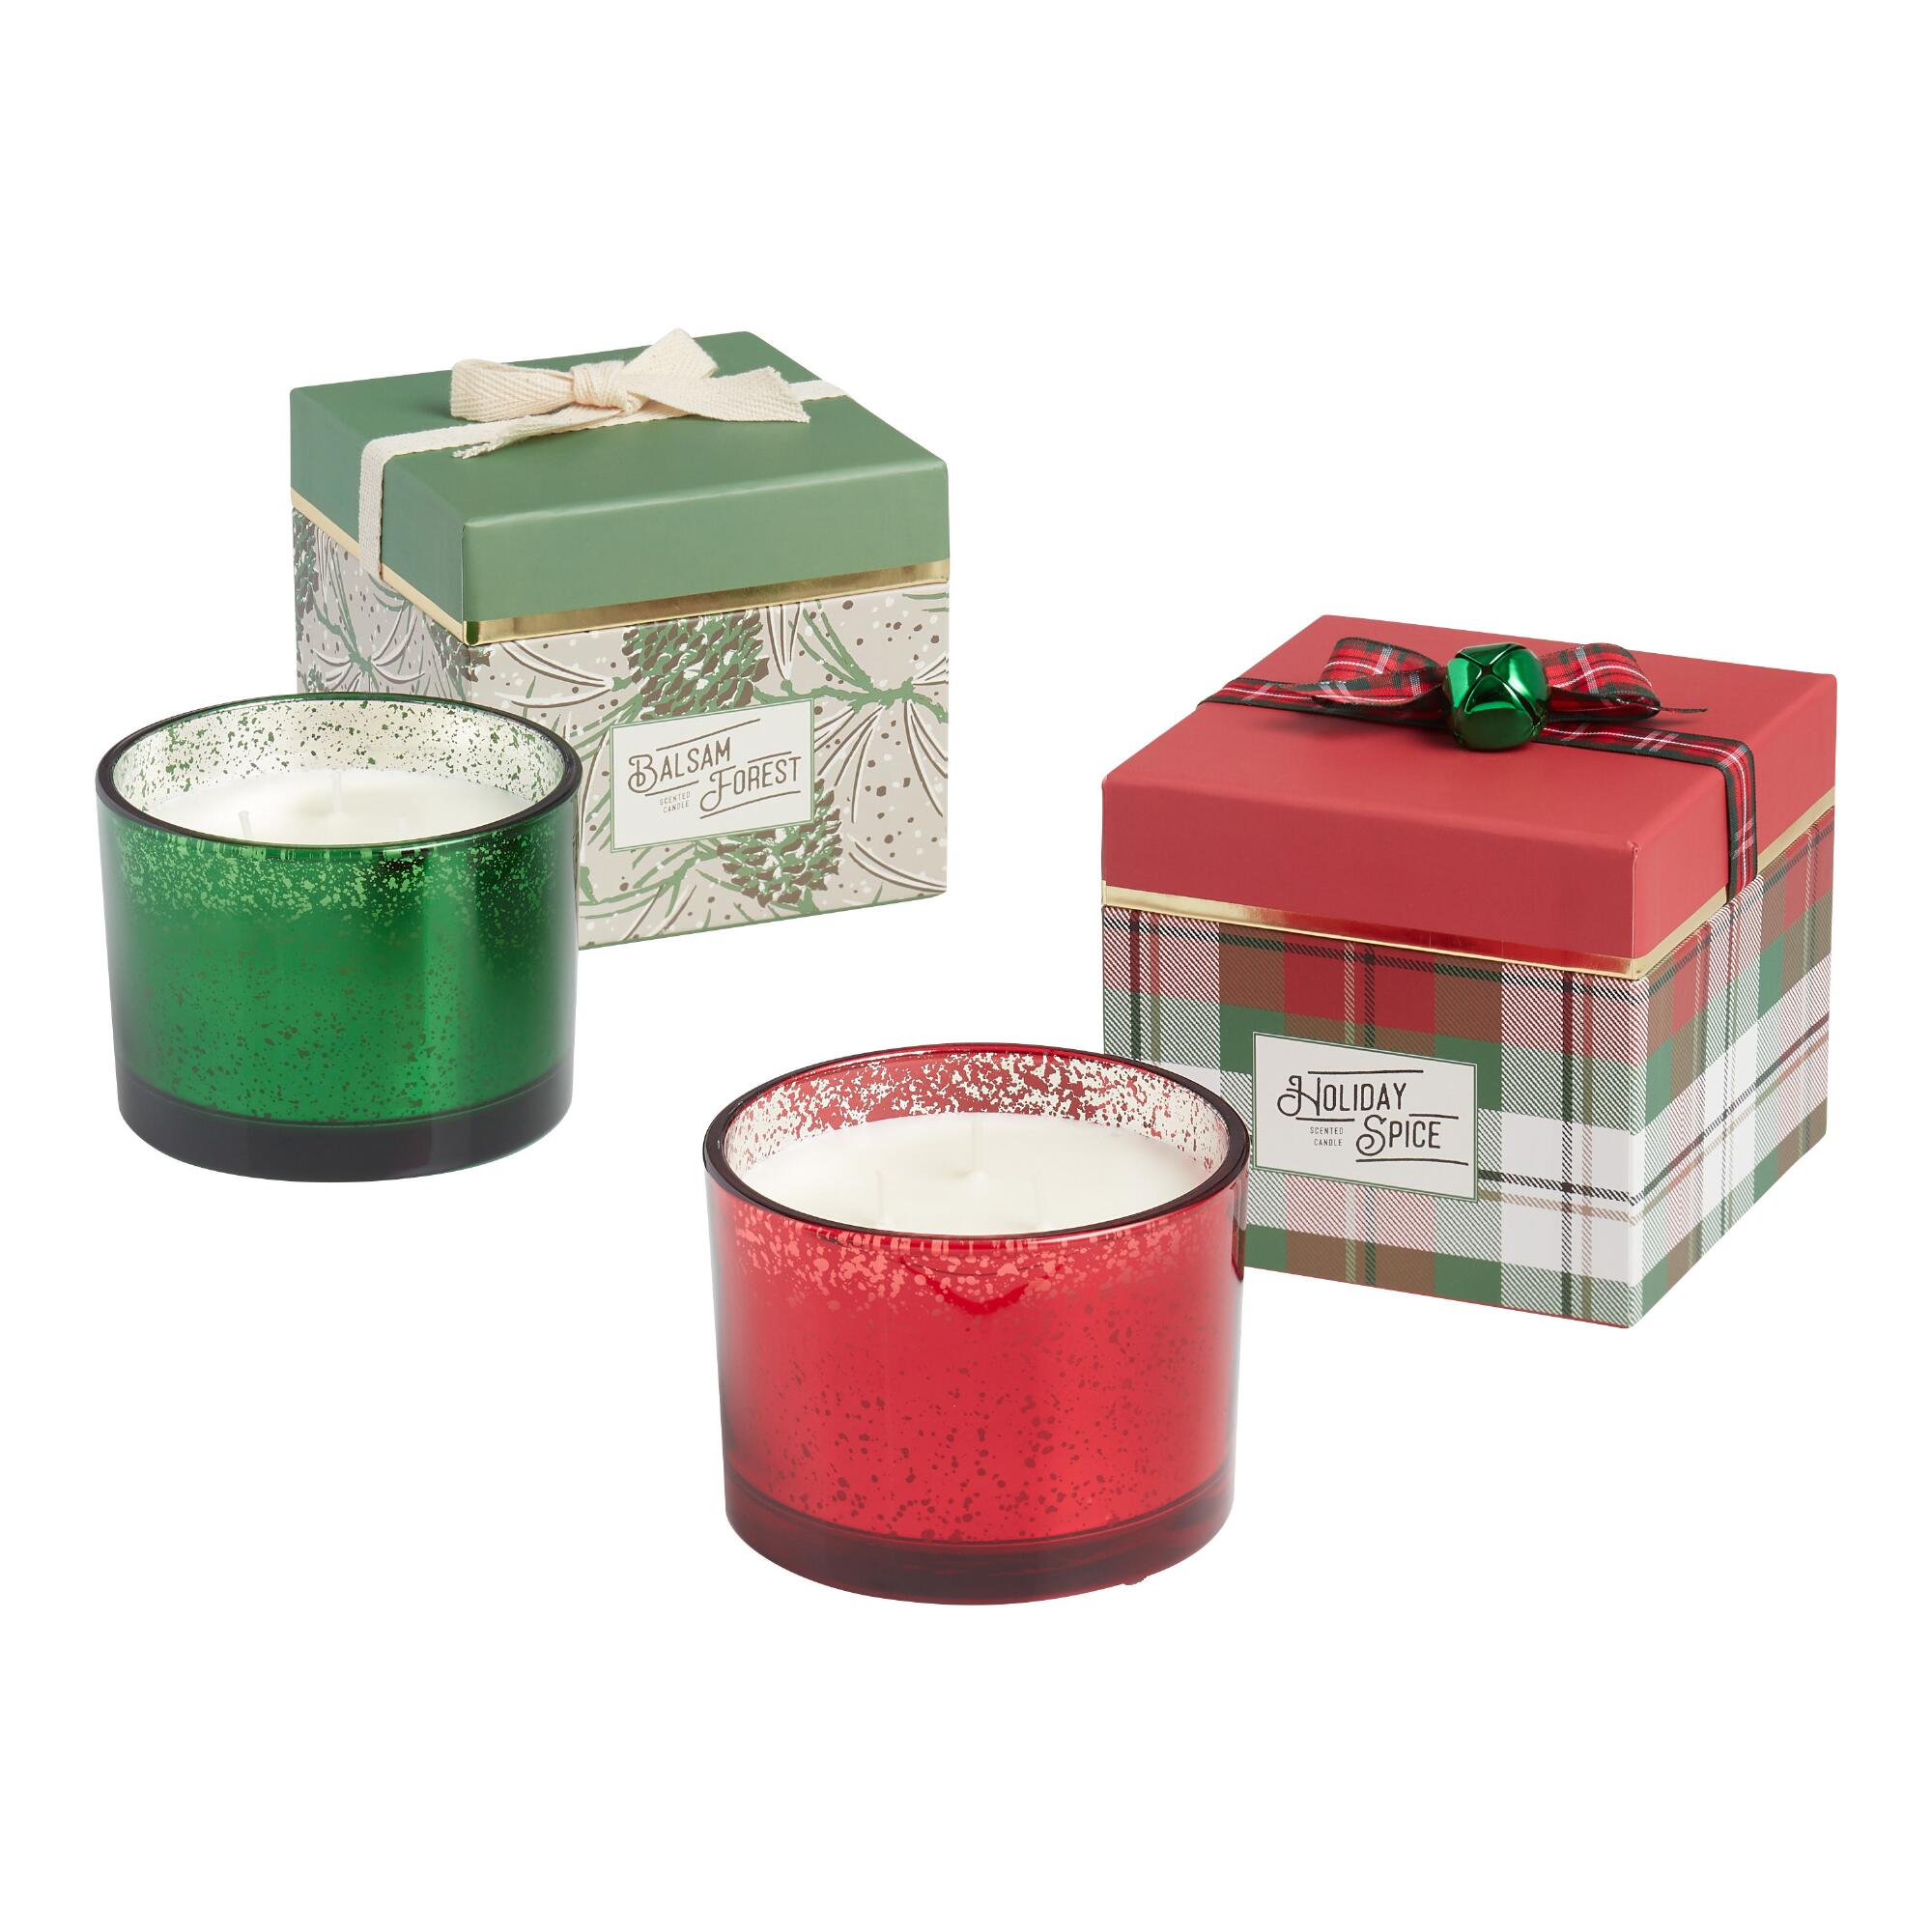 Pier Place Mercury Glass Boxed Holiday Scented Candle: Green by World Market